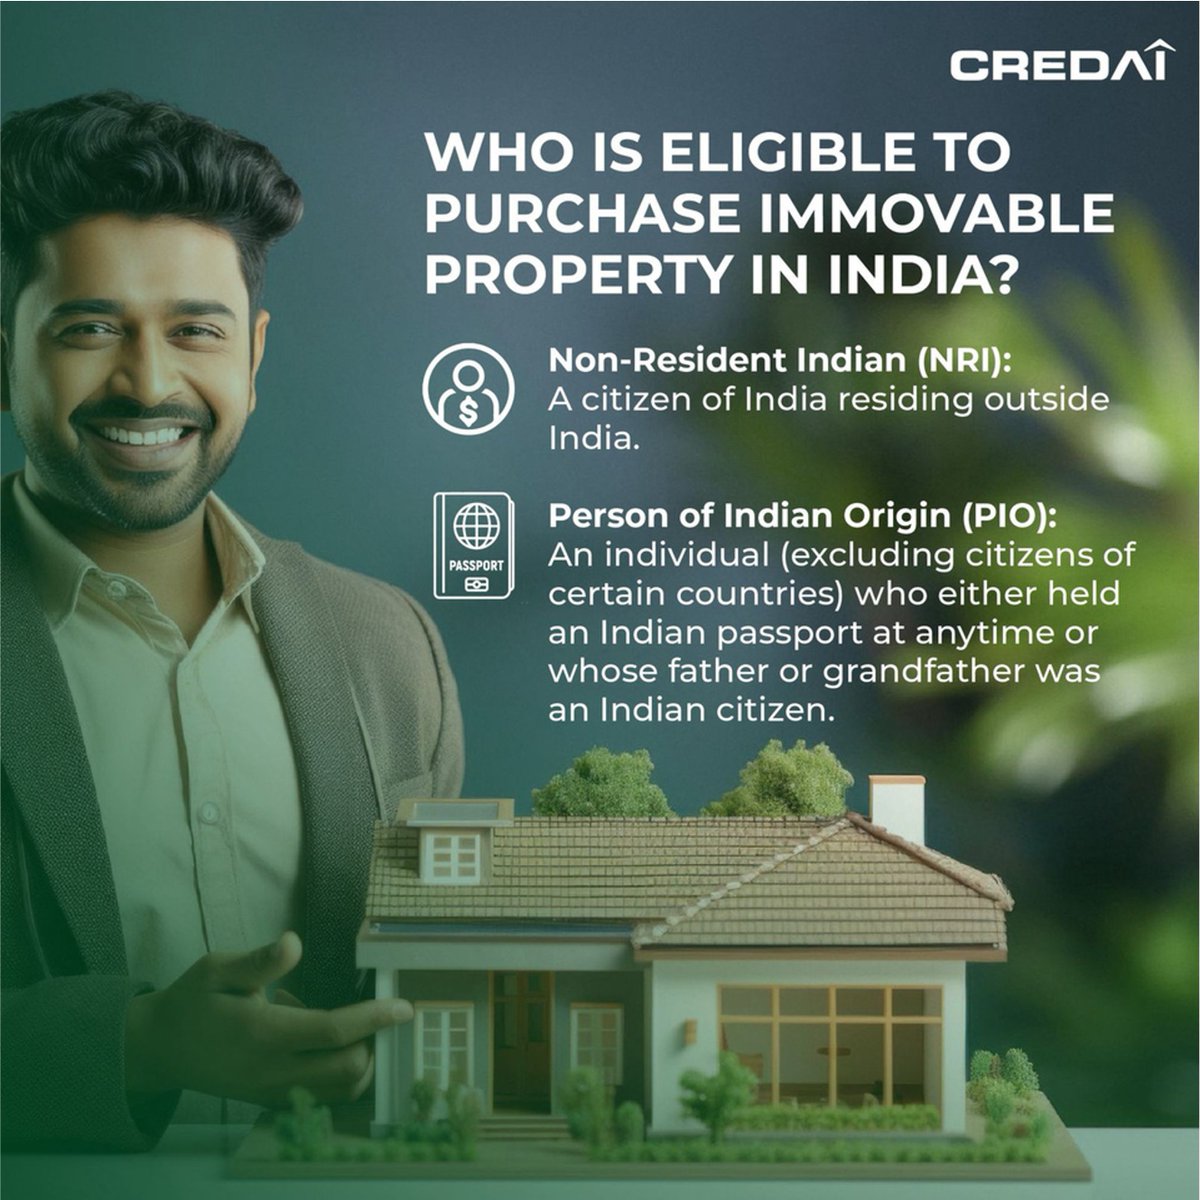 Property Ownership Eligibility in India: Who Can Purchase? #CREDAI #CREDAINational #PropertyOwnership #OwnershipEligibility #RealEstateIndia #PropertyLaws #IndianRealEstate #PropertyRights #InvestInIndia @MCHI_President @CREDAINational @CREDAIPresident @bani_g_anand